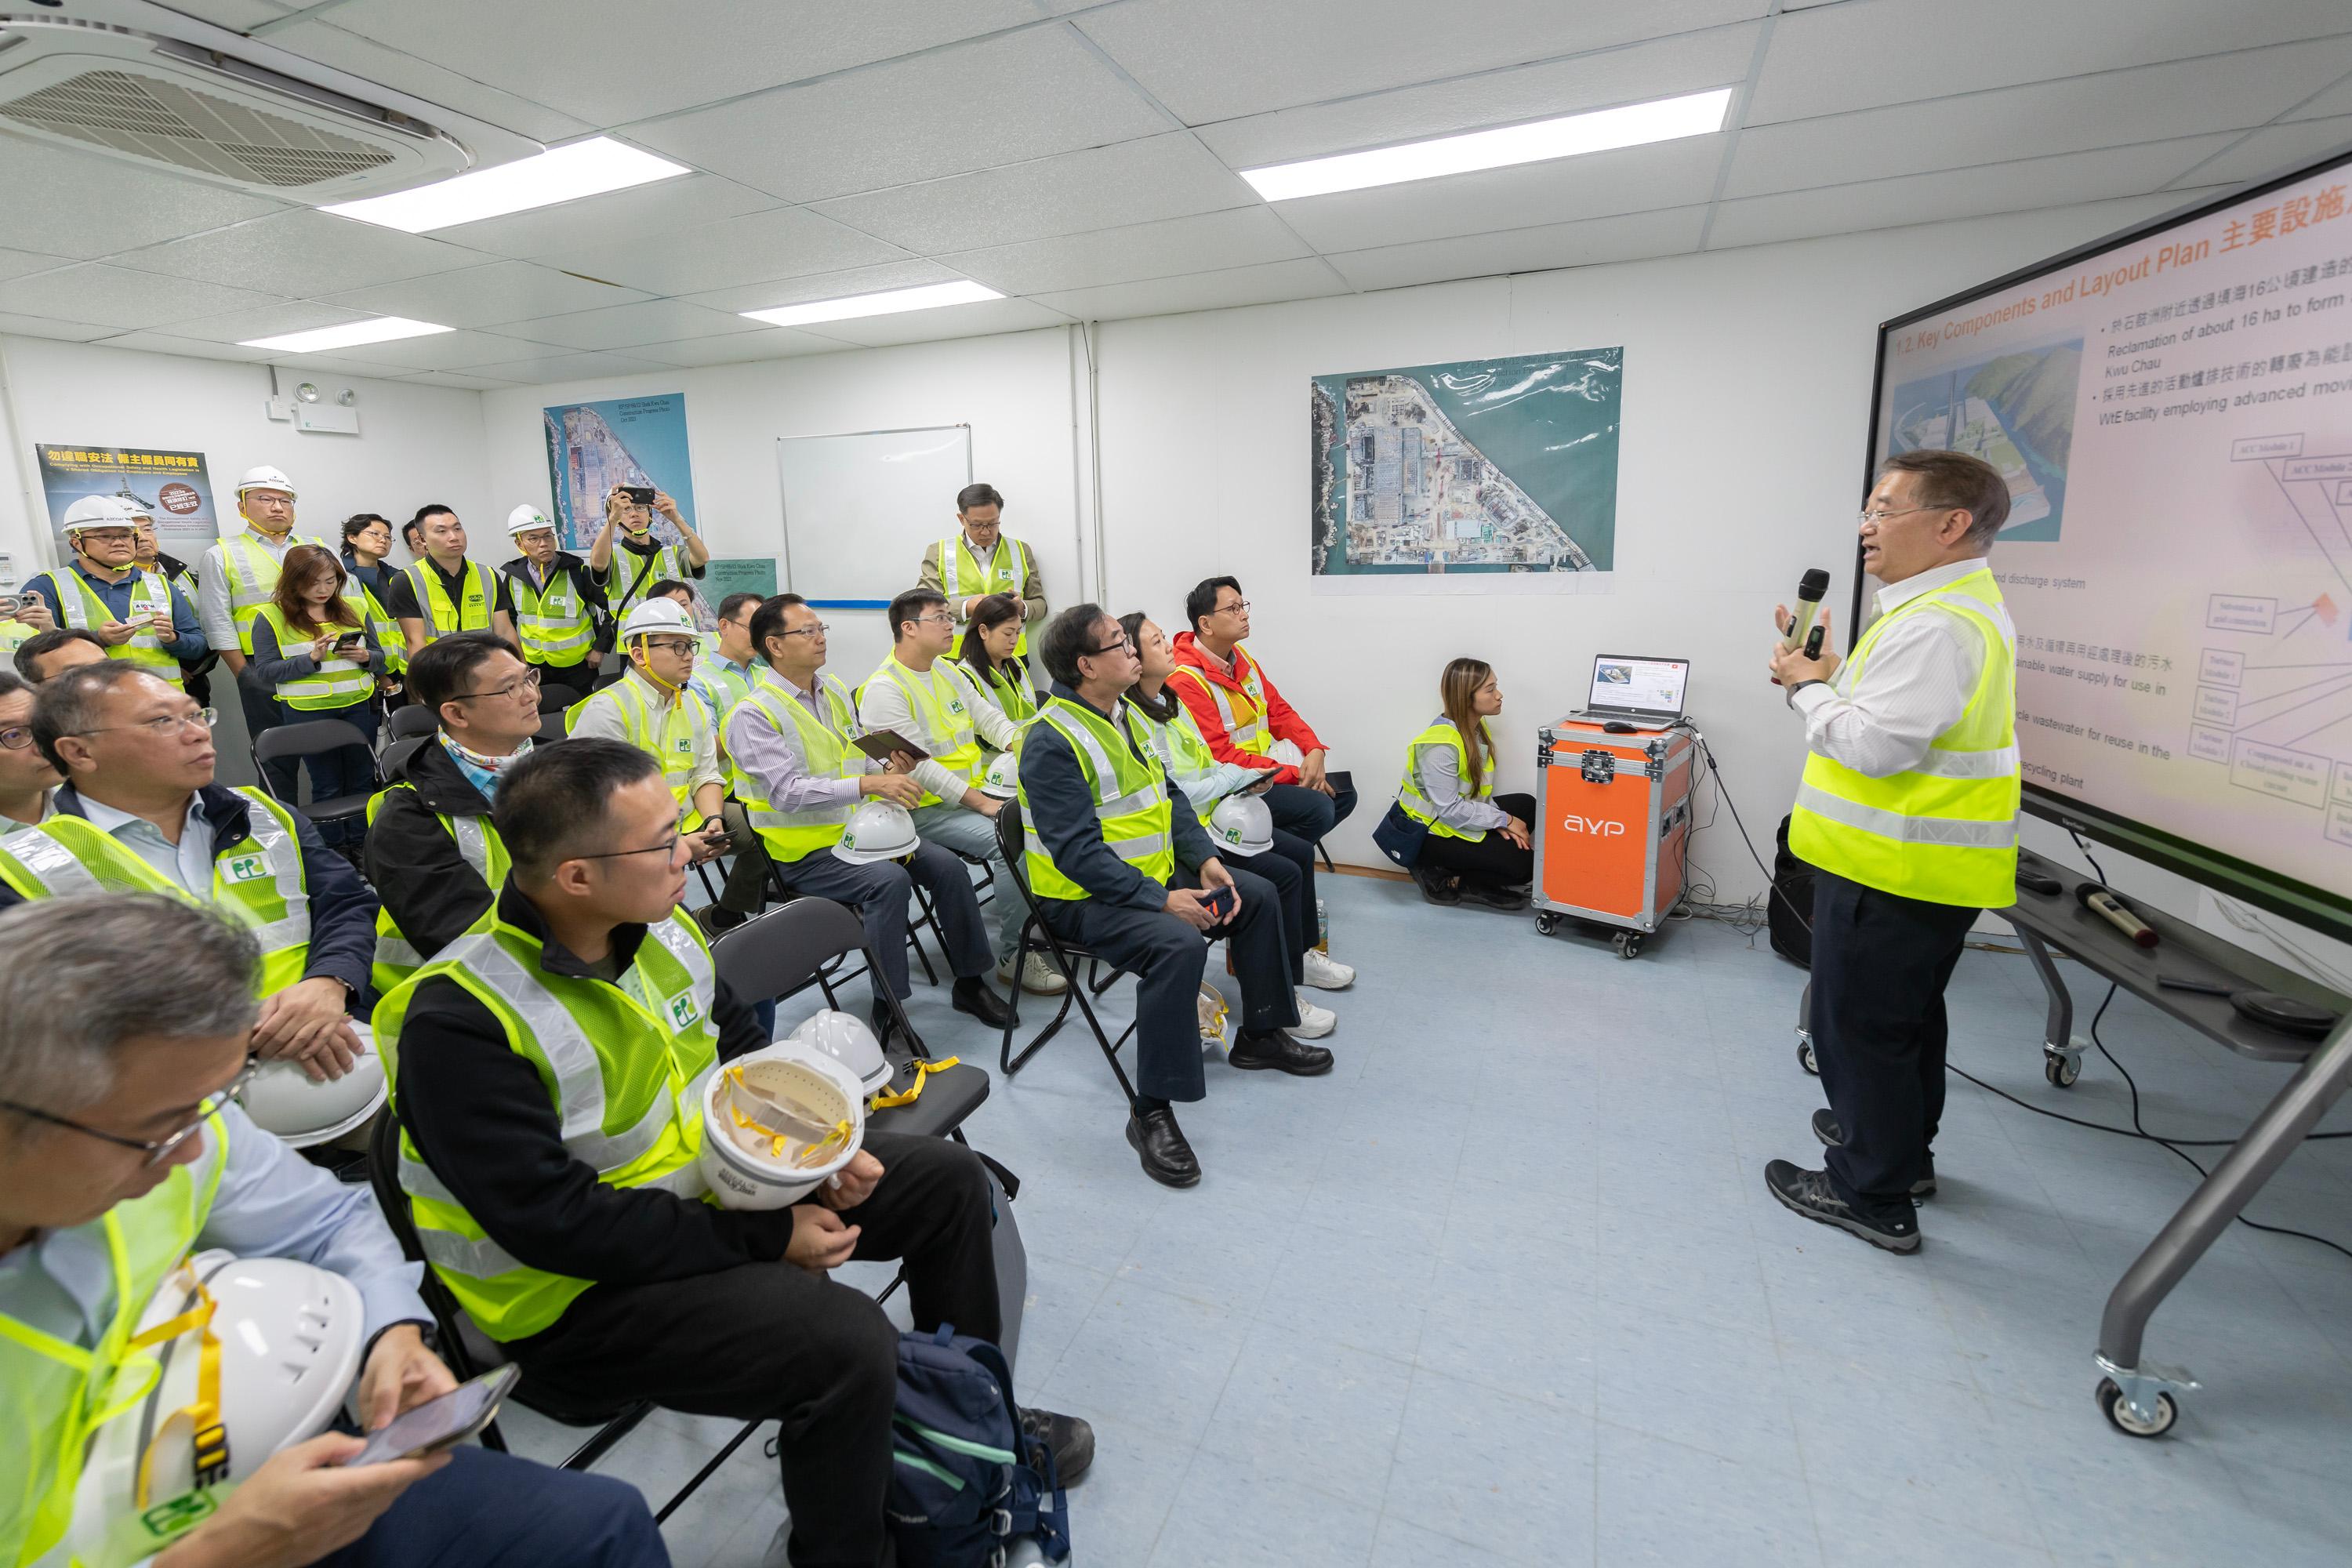 The Legislative Council (LegCo) Public Works Subcommittee conducts a site visit to the construction site of the Integrated Waste Management Facilities Phase 1 (I·PARK1) today (December 5). Photo shows LegCo Members receiving a briefing by the Environmental Protection Department on the implementation progress of I·PARK1.